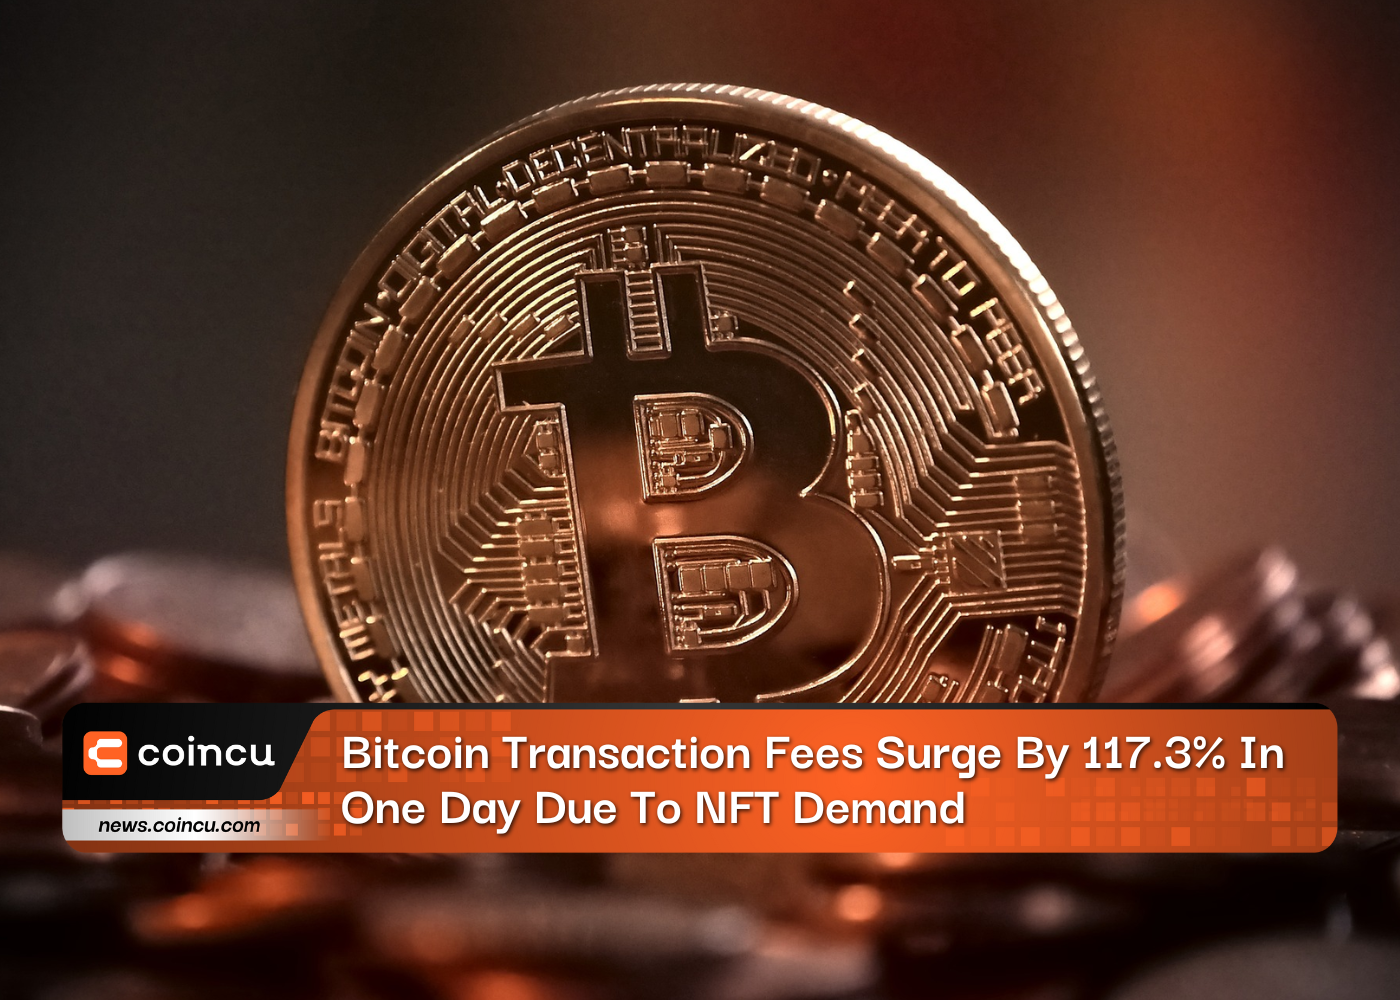 Bitcoin Transaction Fees Surge By 117.3% In One Day Due To NFT Demand